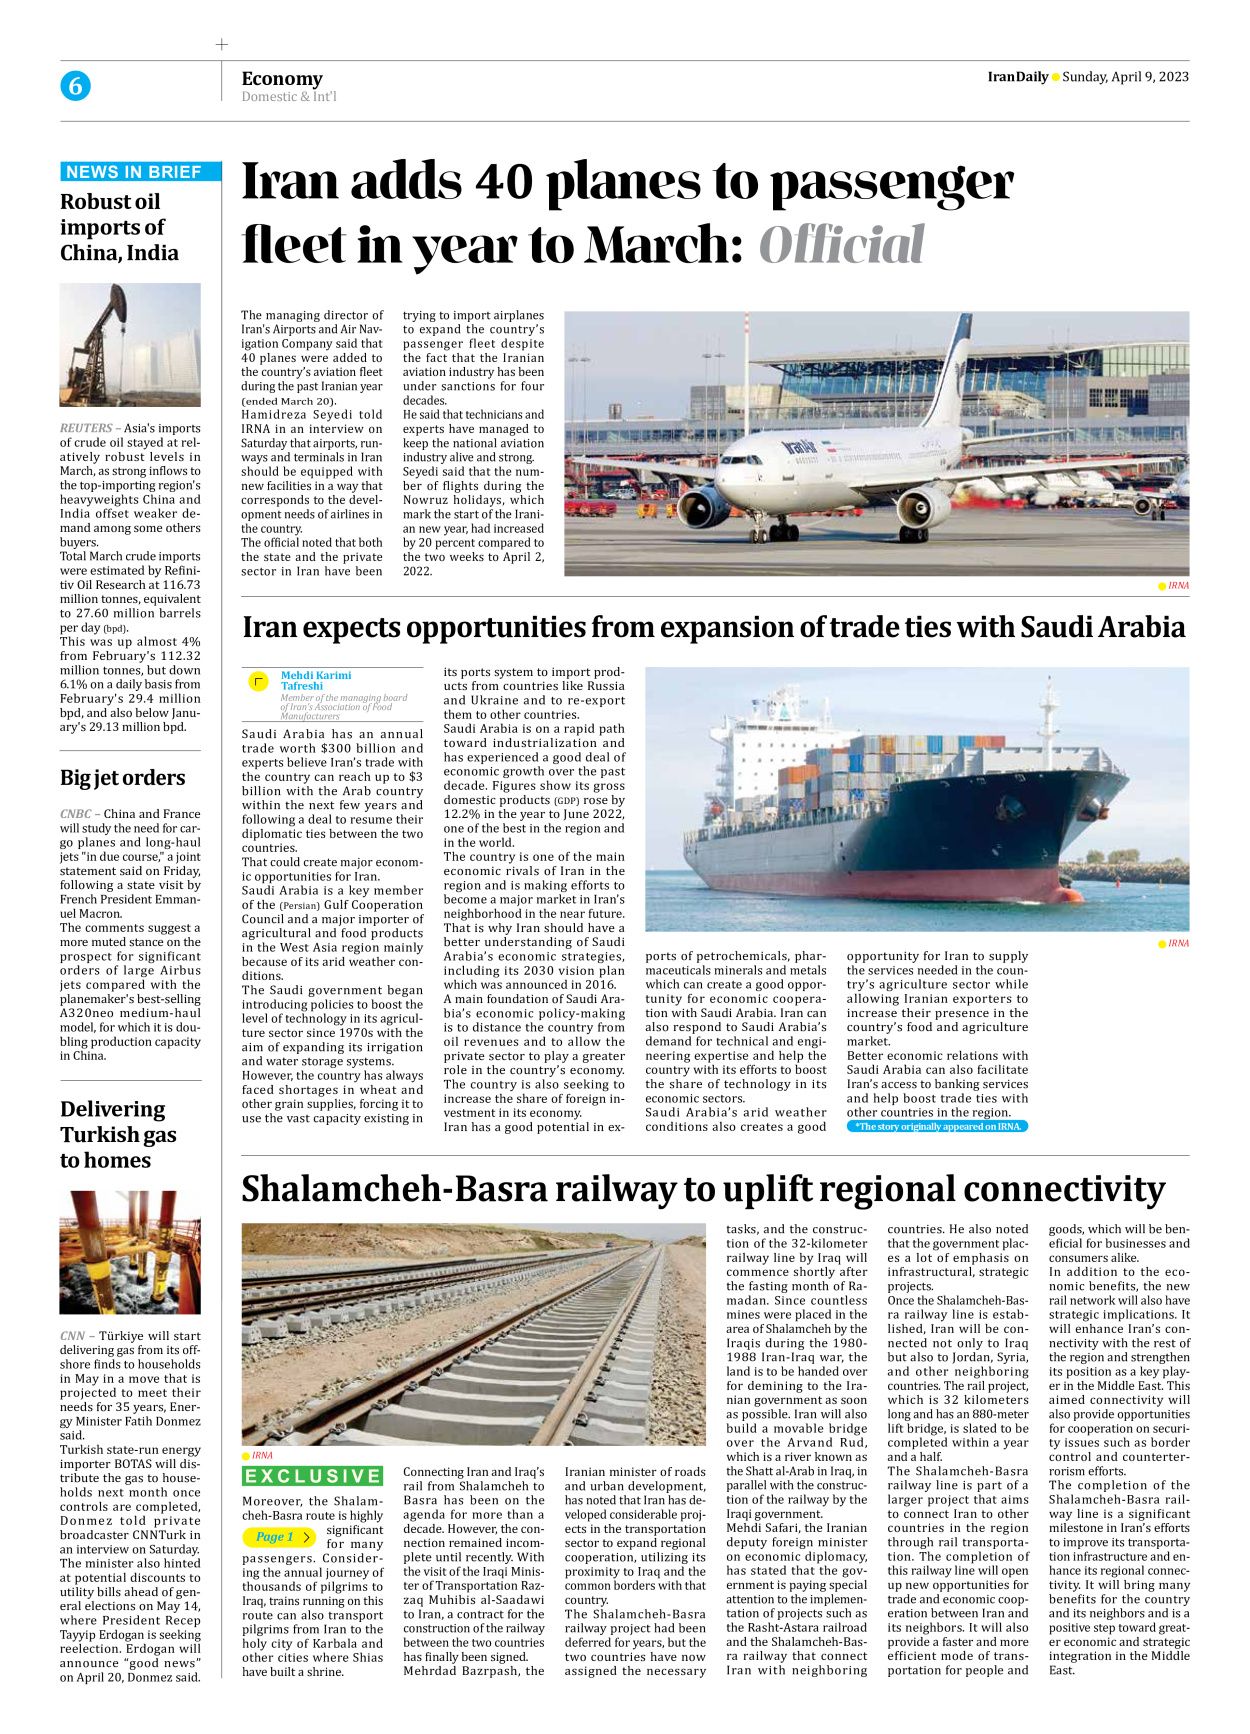 Iran Daily - Number Seven Thousand Two Hundred and Sixty Five - 09 April 2023 - Page 6